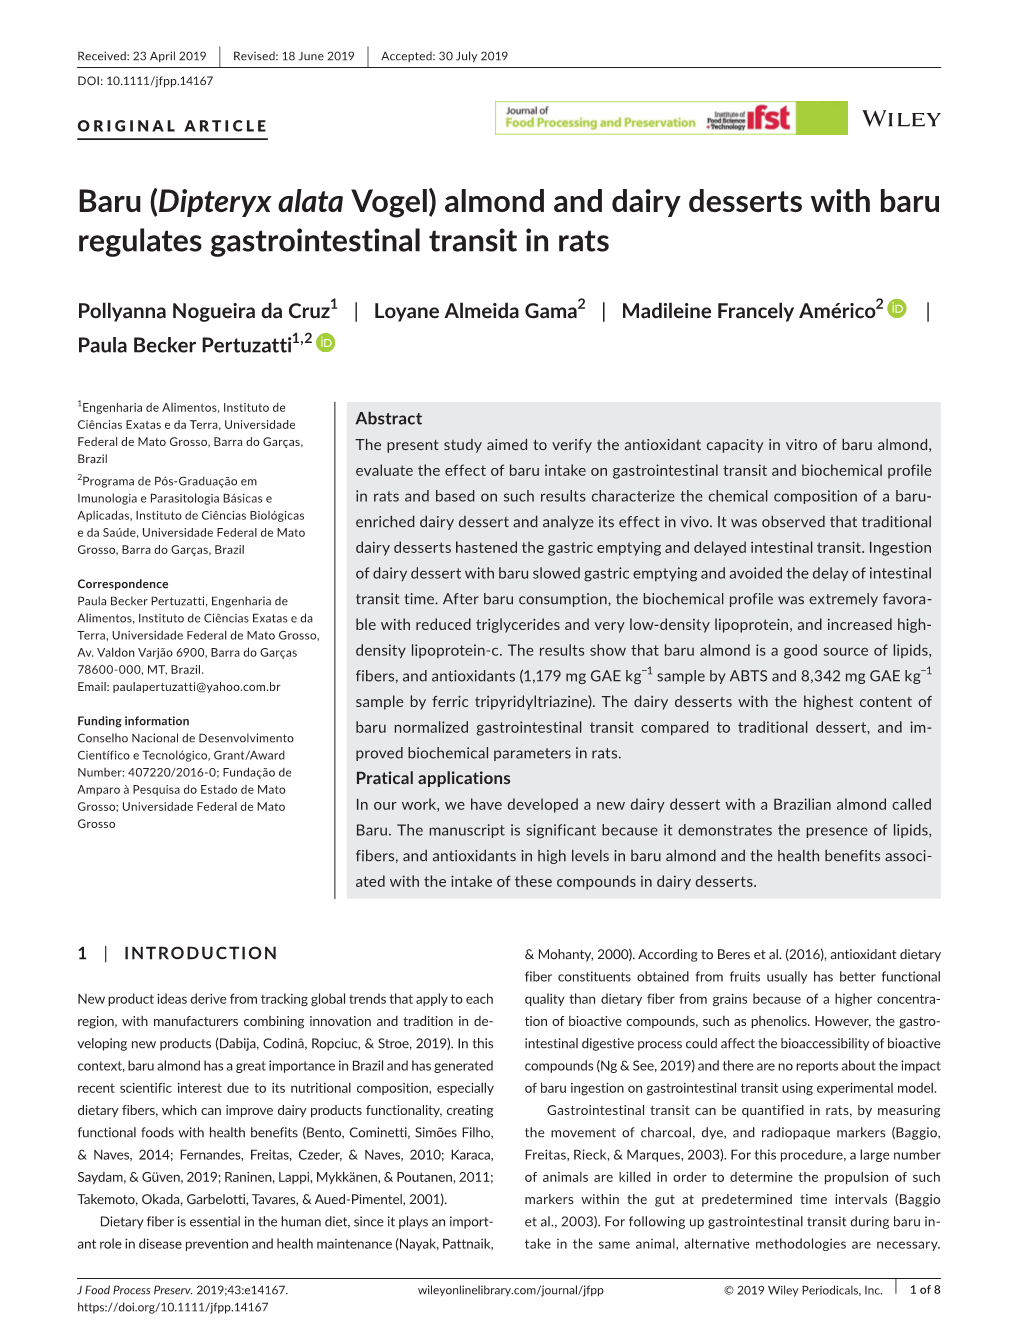 Almond and Dairy Desserts with Baru Regulates Gastrointestinal Transit in Rats